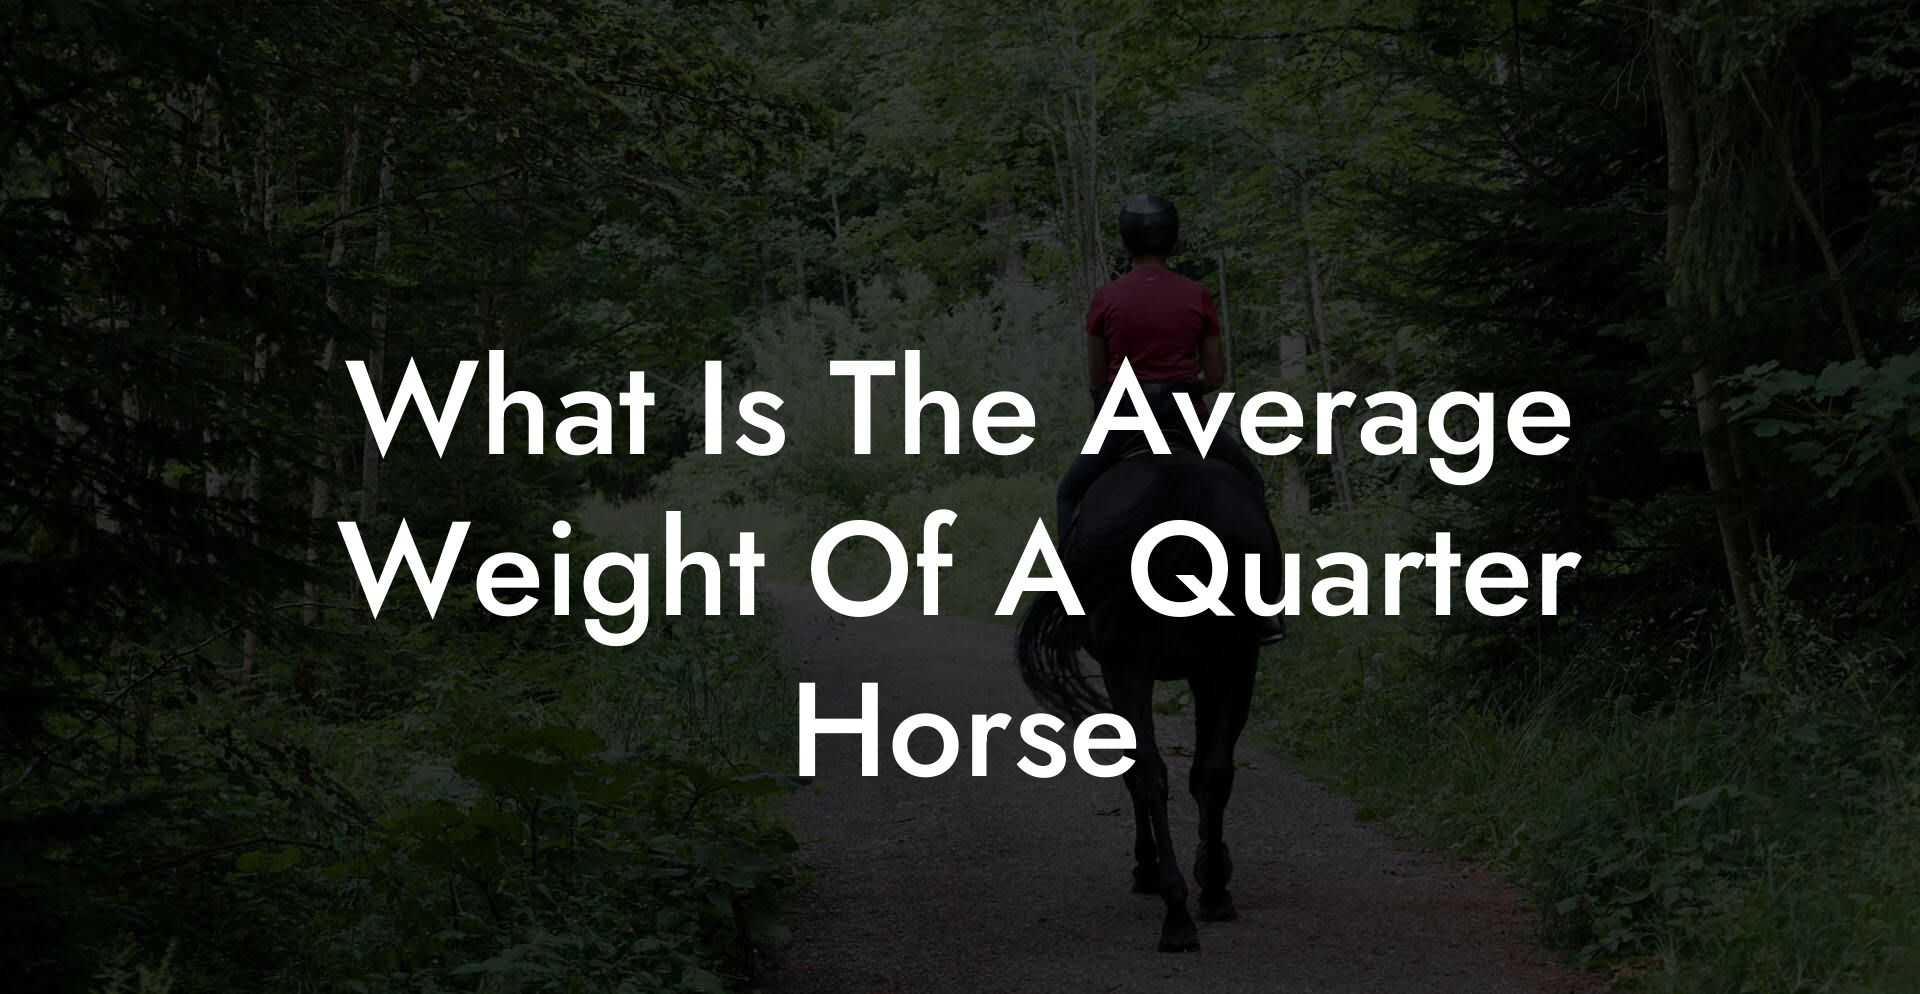 What Is The Average Weight Of A Quarter Horse